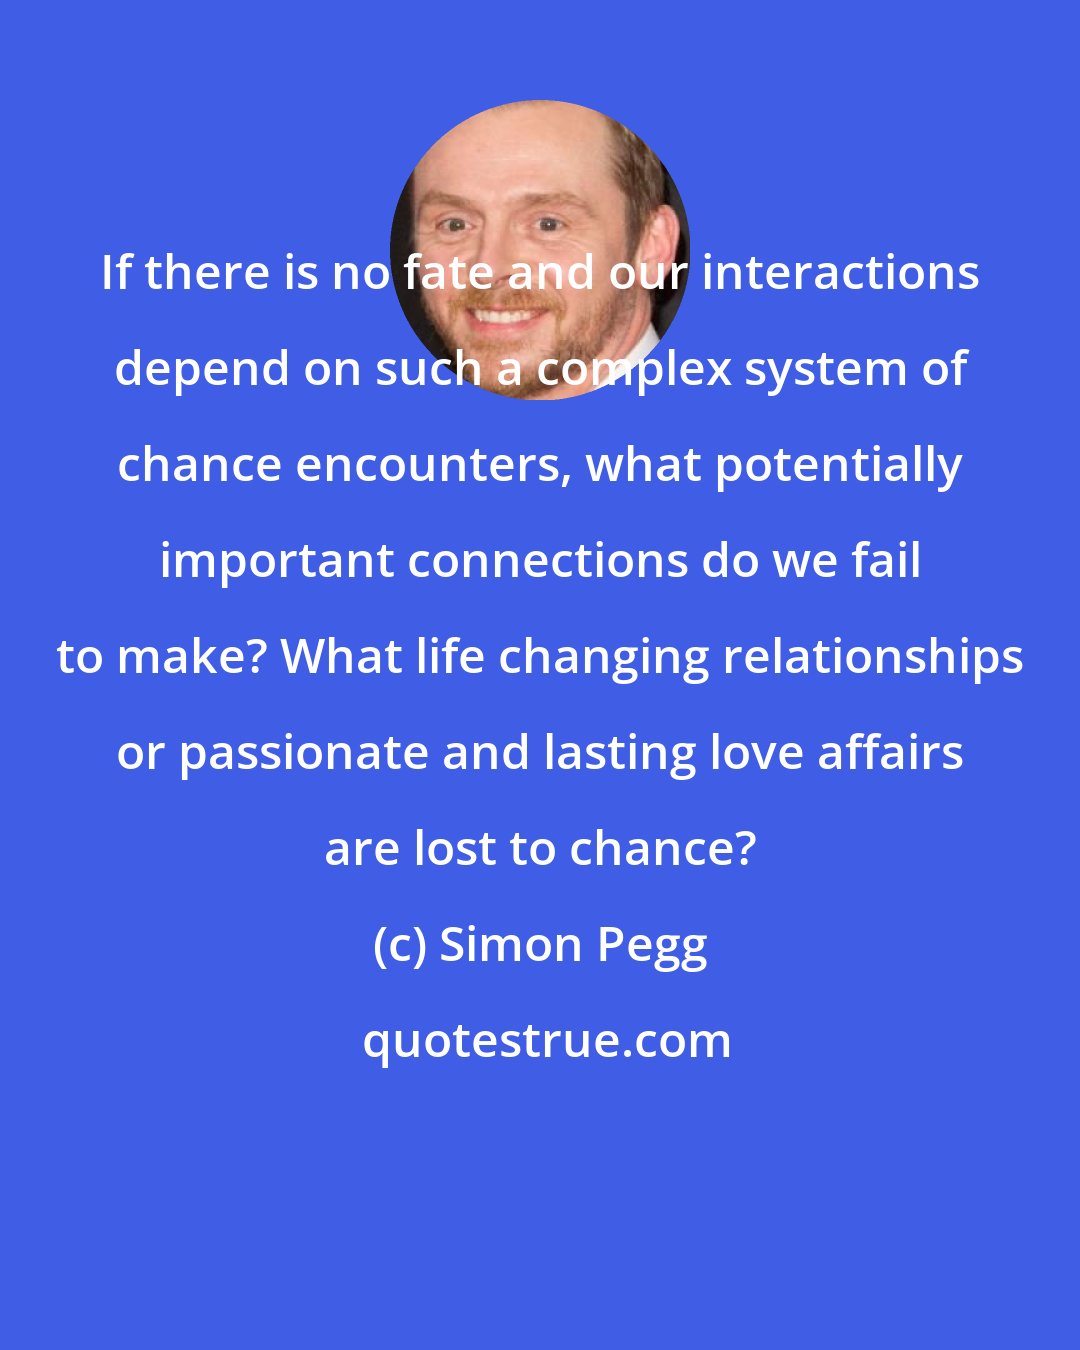 Simon Pegg: If there is no fate and our interactions depend on such a complex system of chance encounters, what potentially important connections do we fail to make? What life changing relationships or passionate and lasting love affairs are lost to chance?